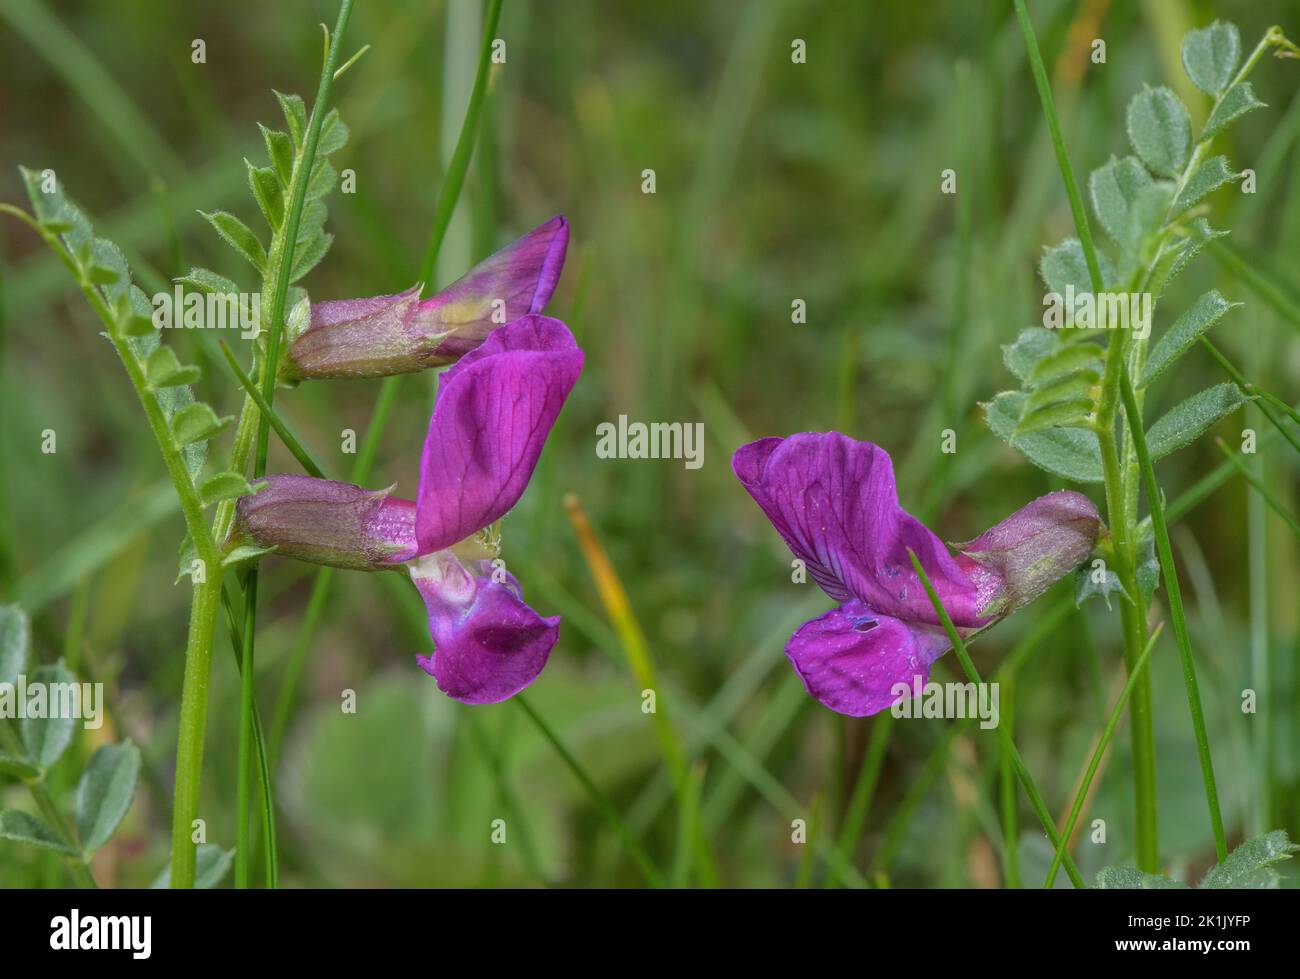 Pyrenean Vetch, Vicia pyrenaica, in flower in the Pyrenees. Stock Photo